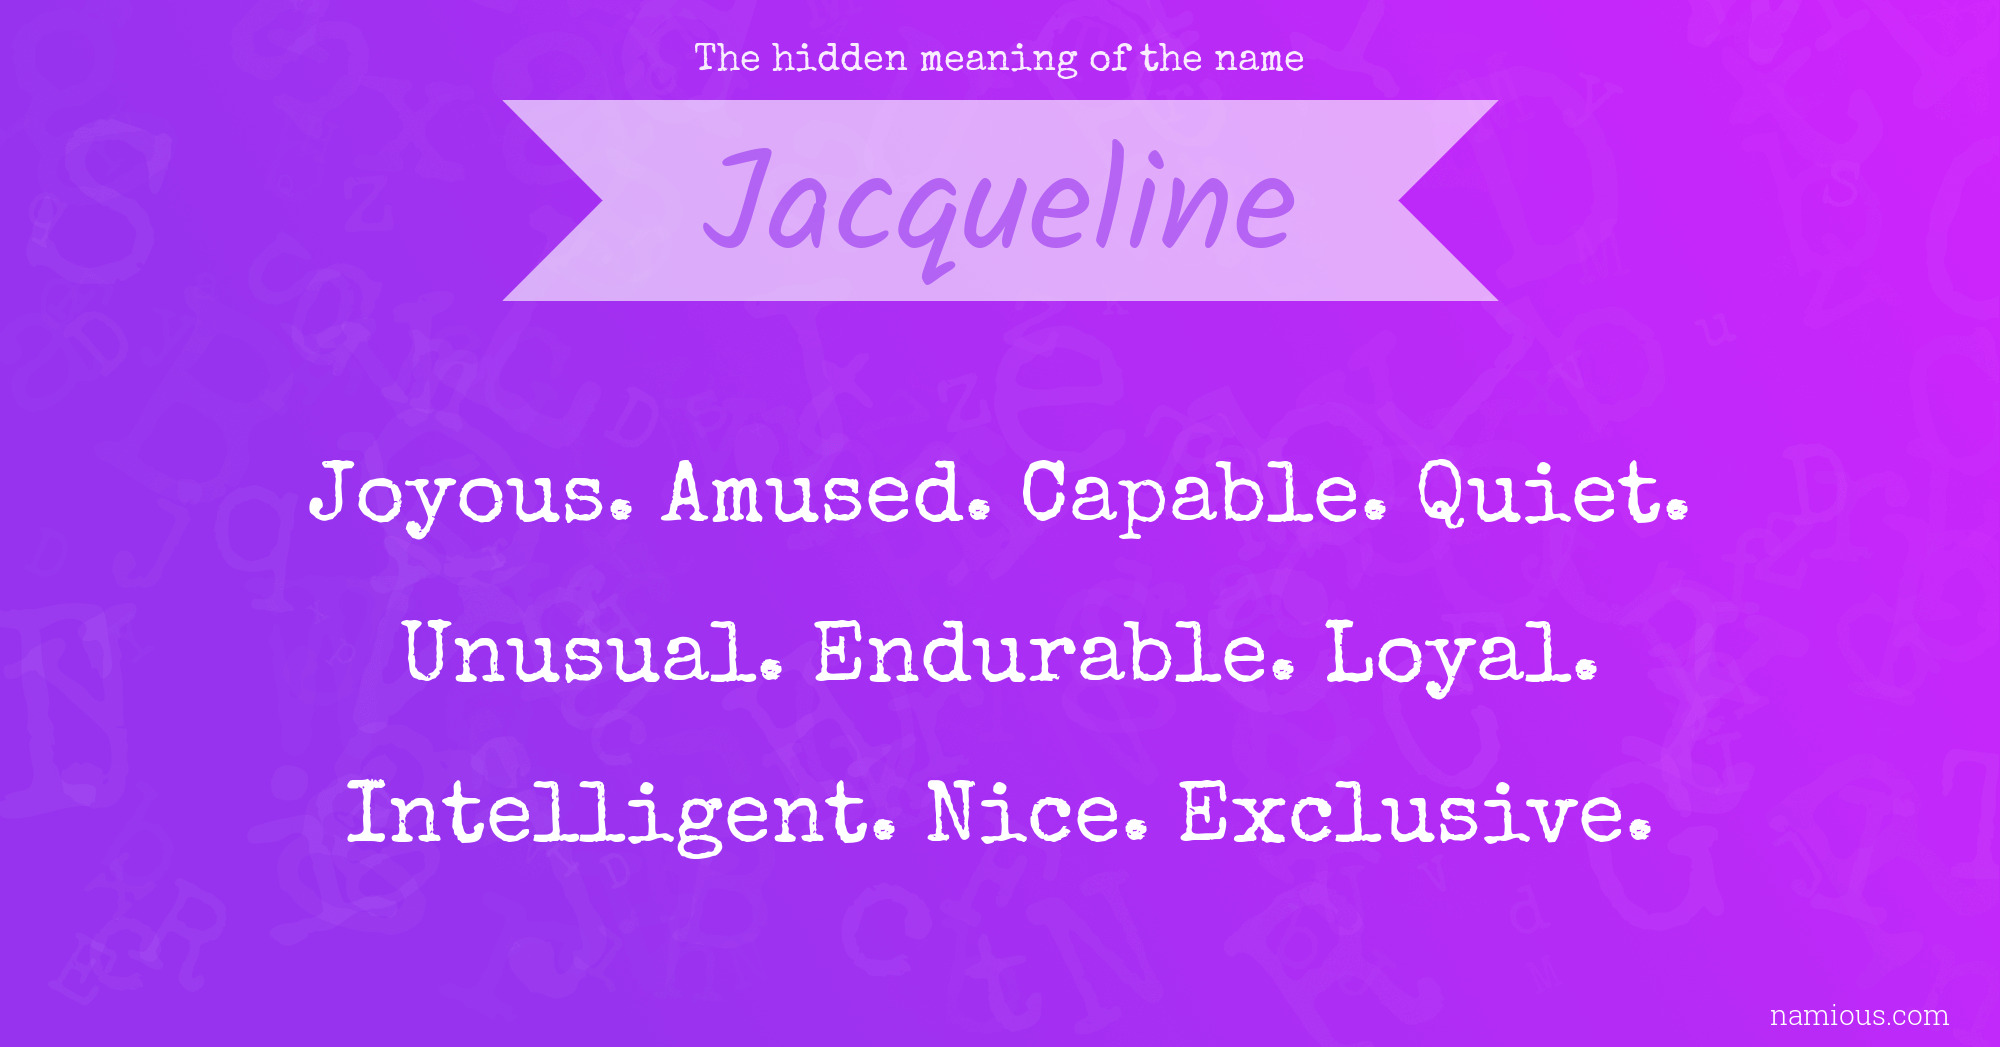 The hidden meaning of the name Jacqueline